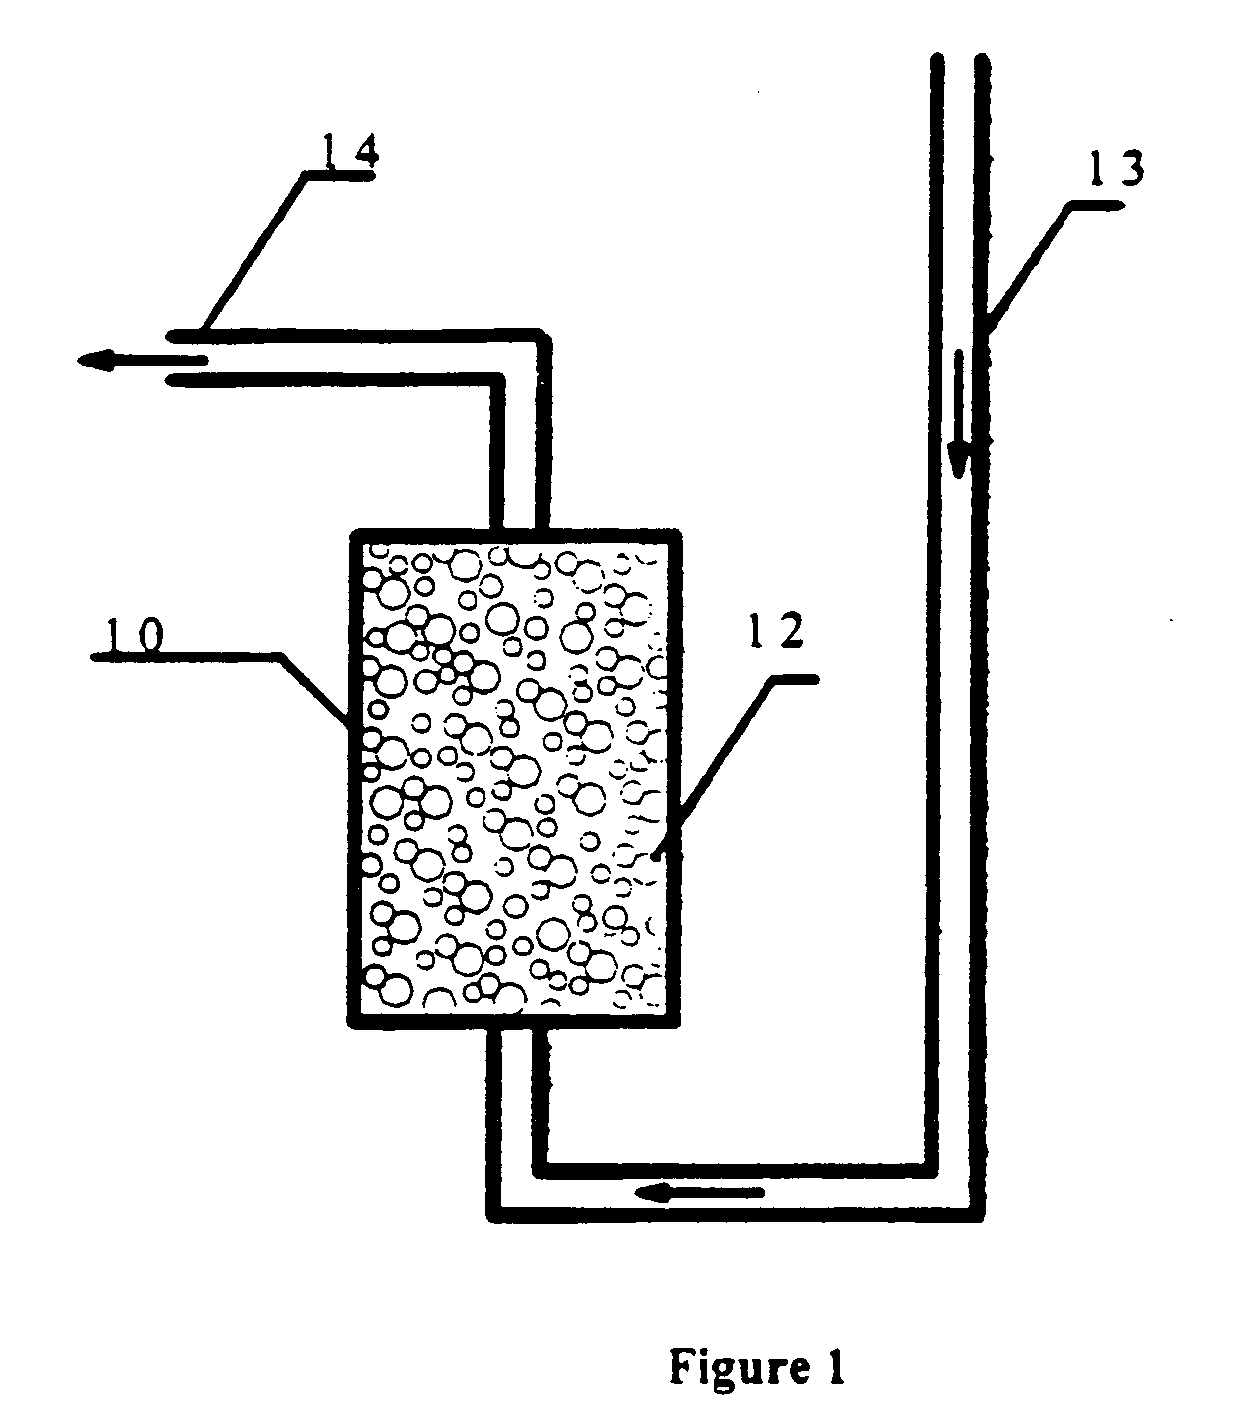 Clarification and sorptive-filtration system for the capture of constituents and particulate matter in liquids and gases